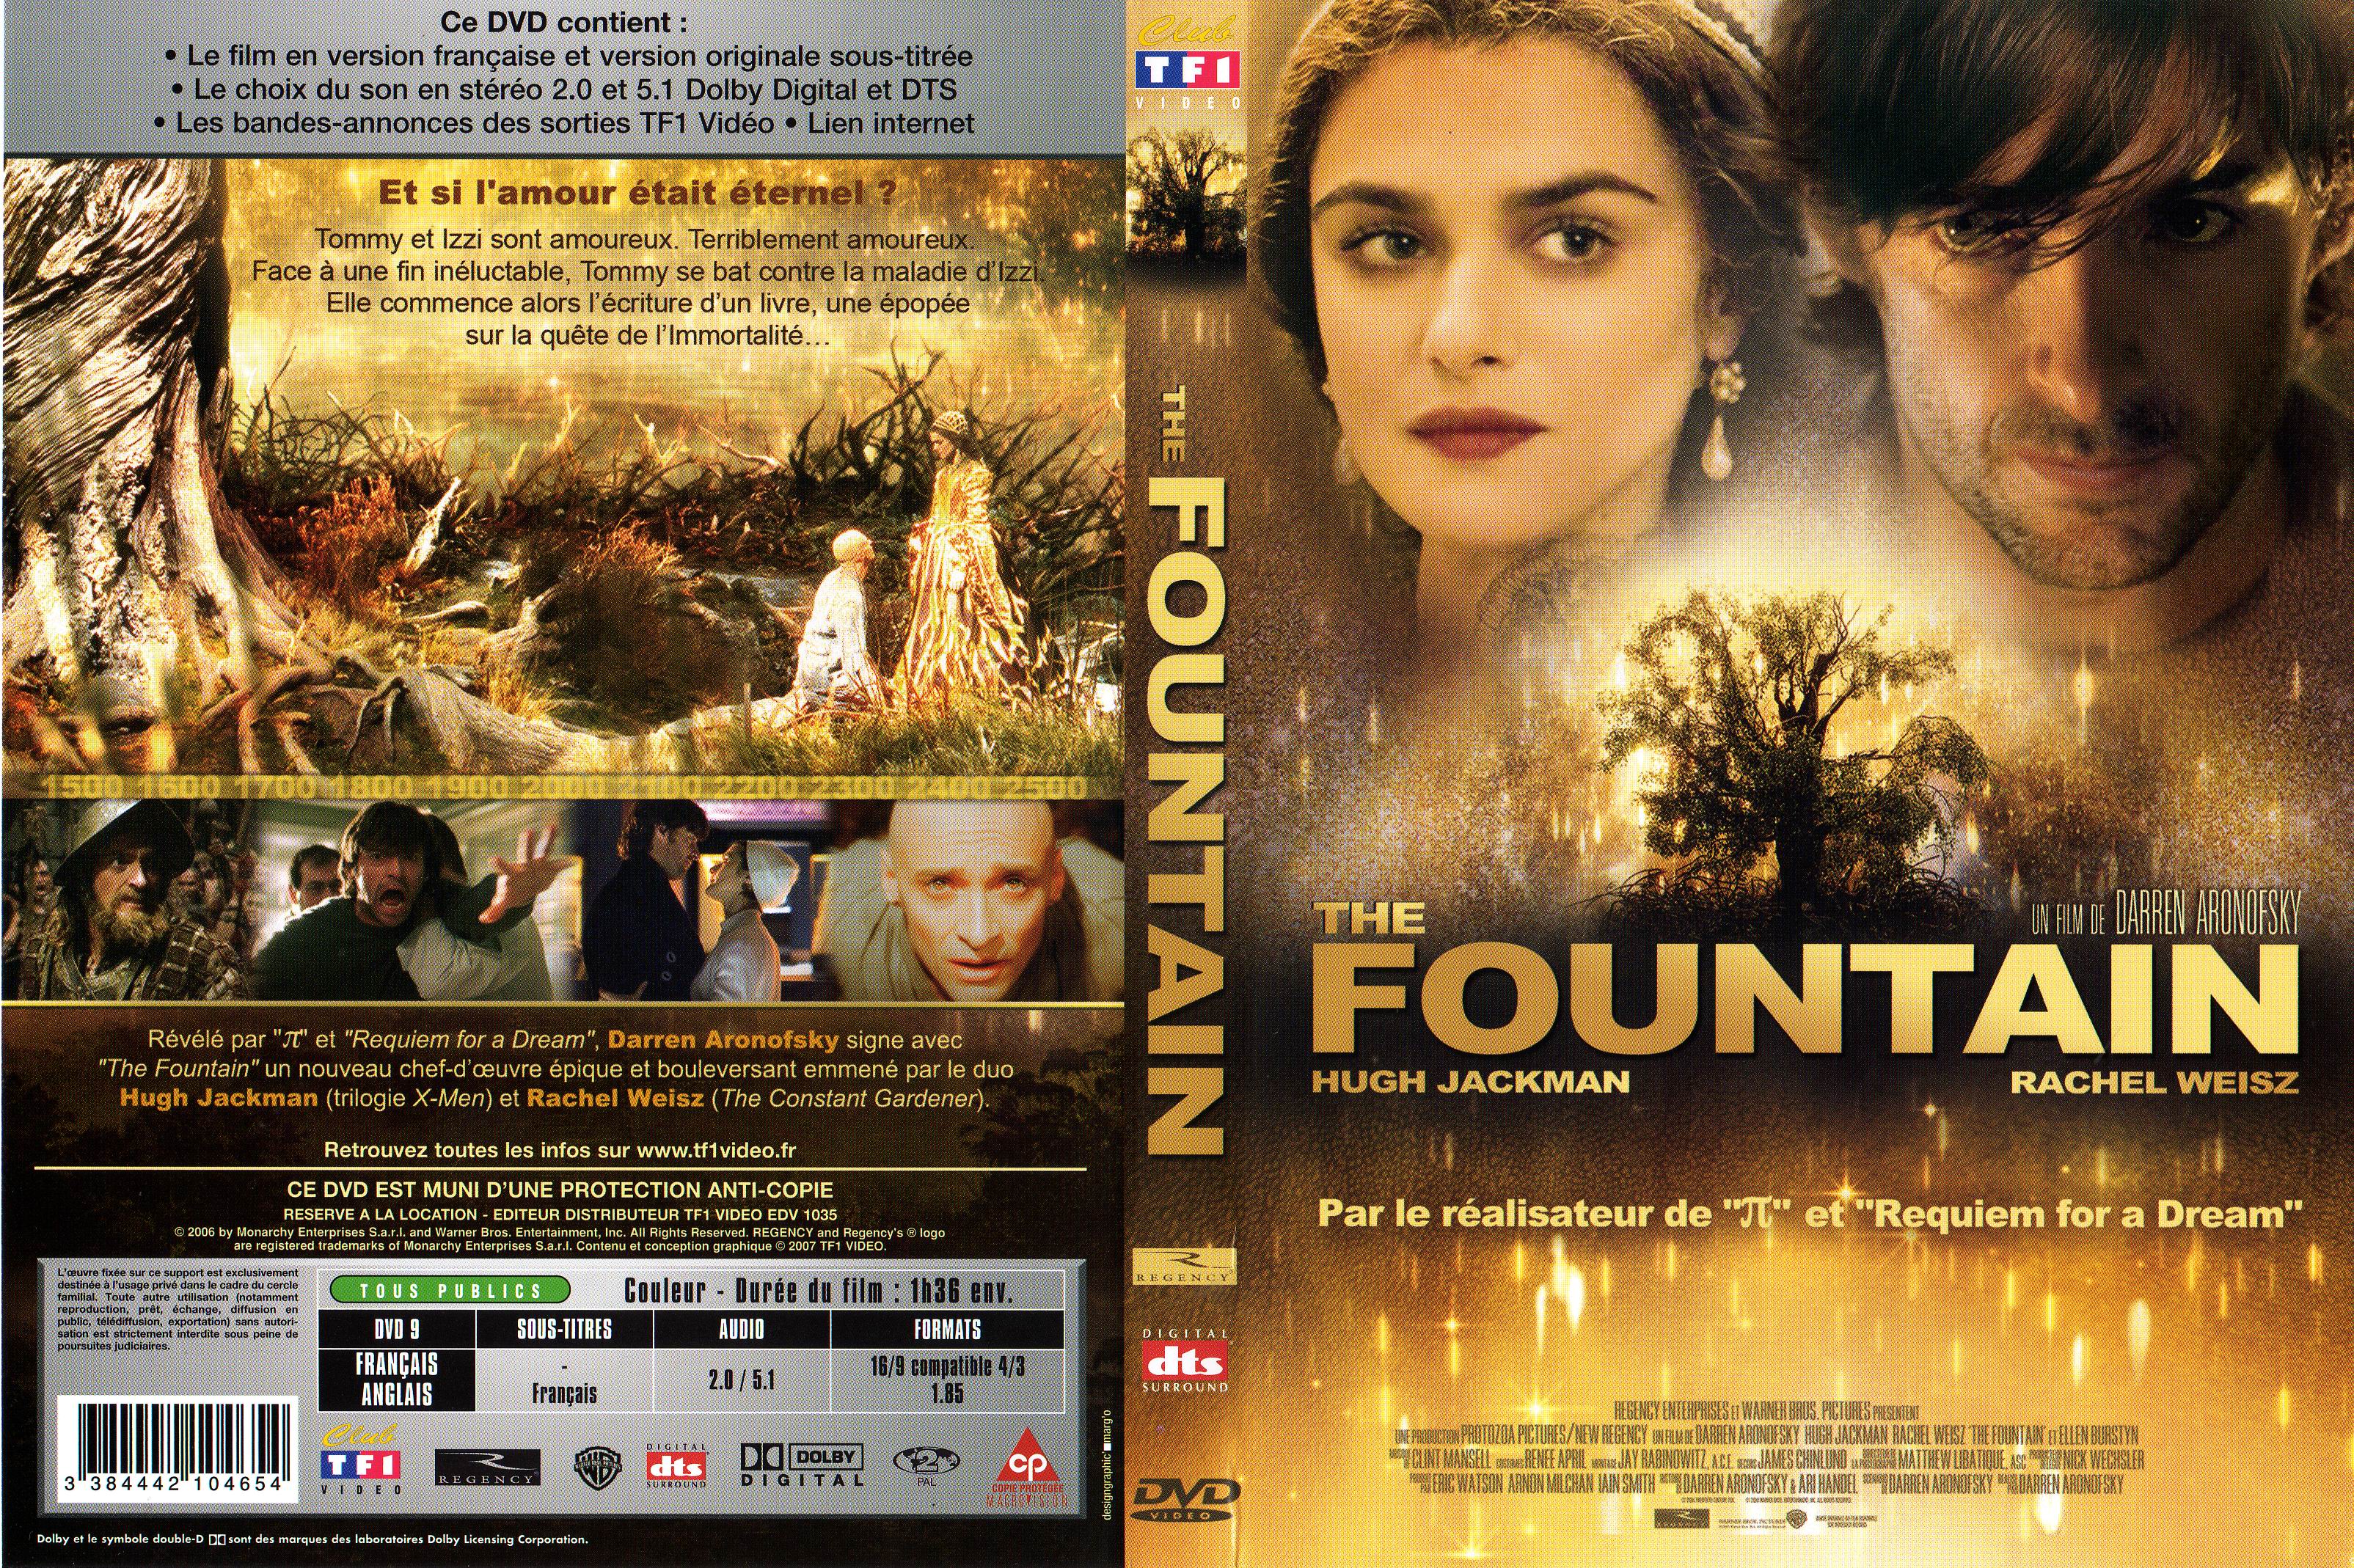 Jaquette DVD The fountain